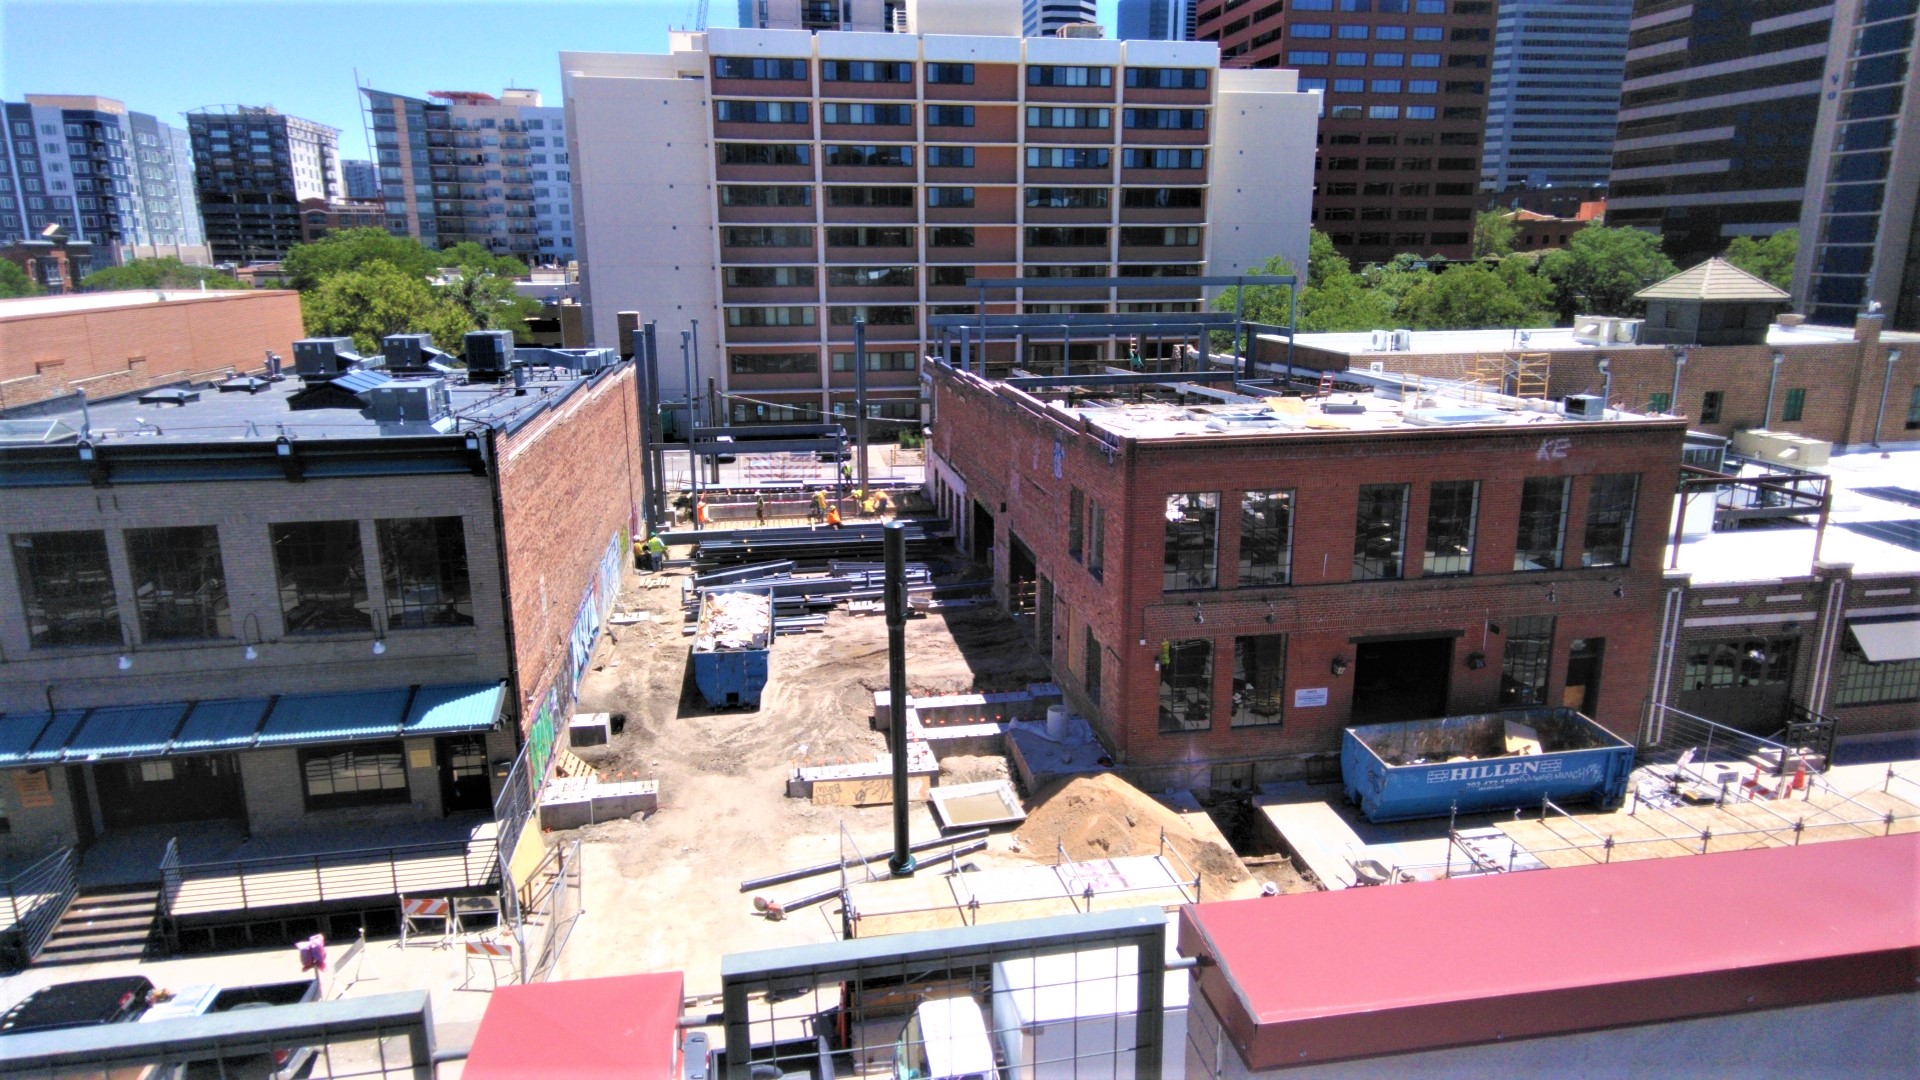 Project in Progress! Check out our work on the Riot House in Denver, CO